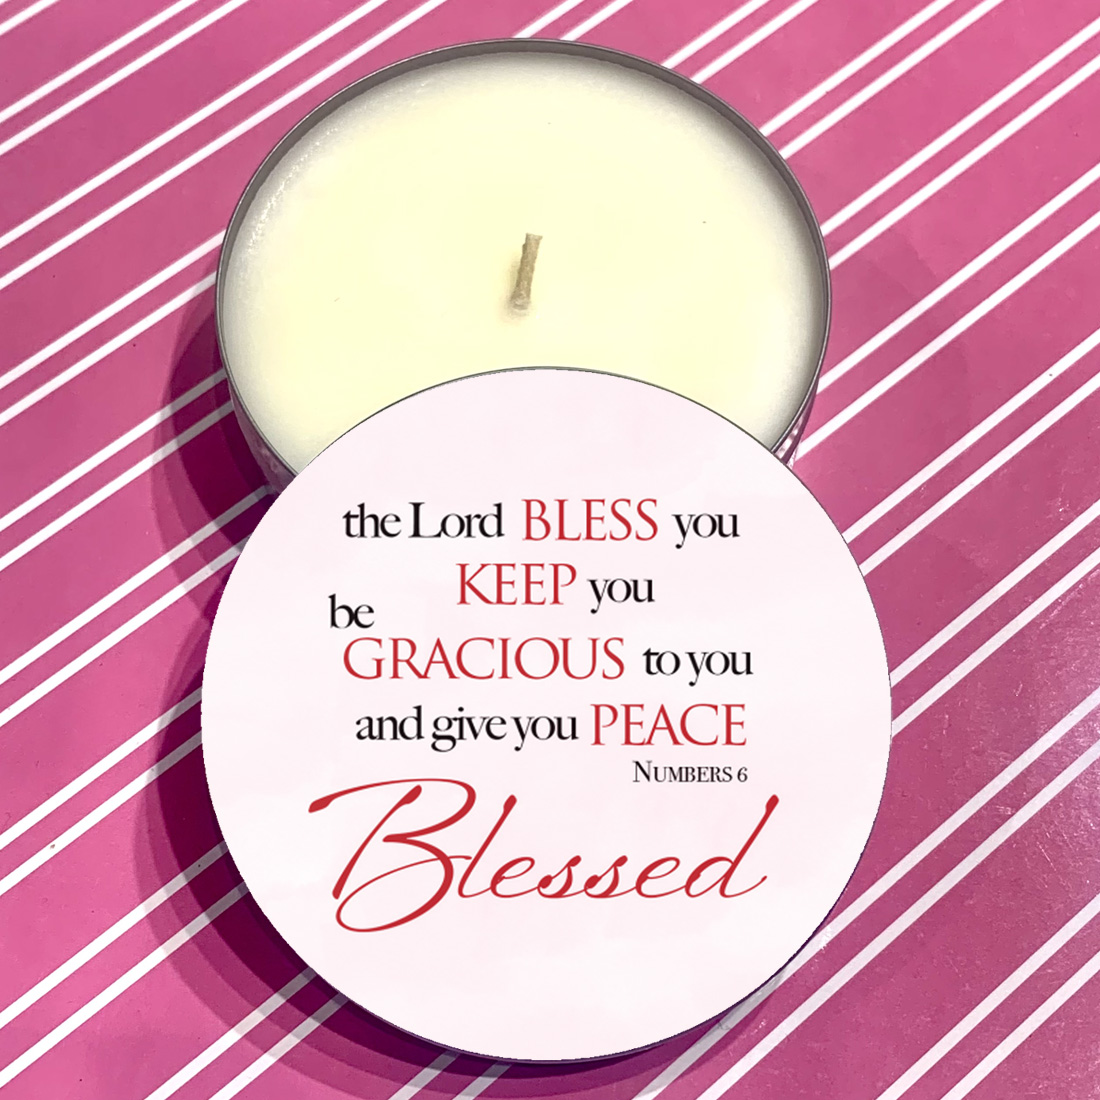 "BLESSED" - POMEGRANATE CANDLE TIN